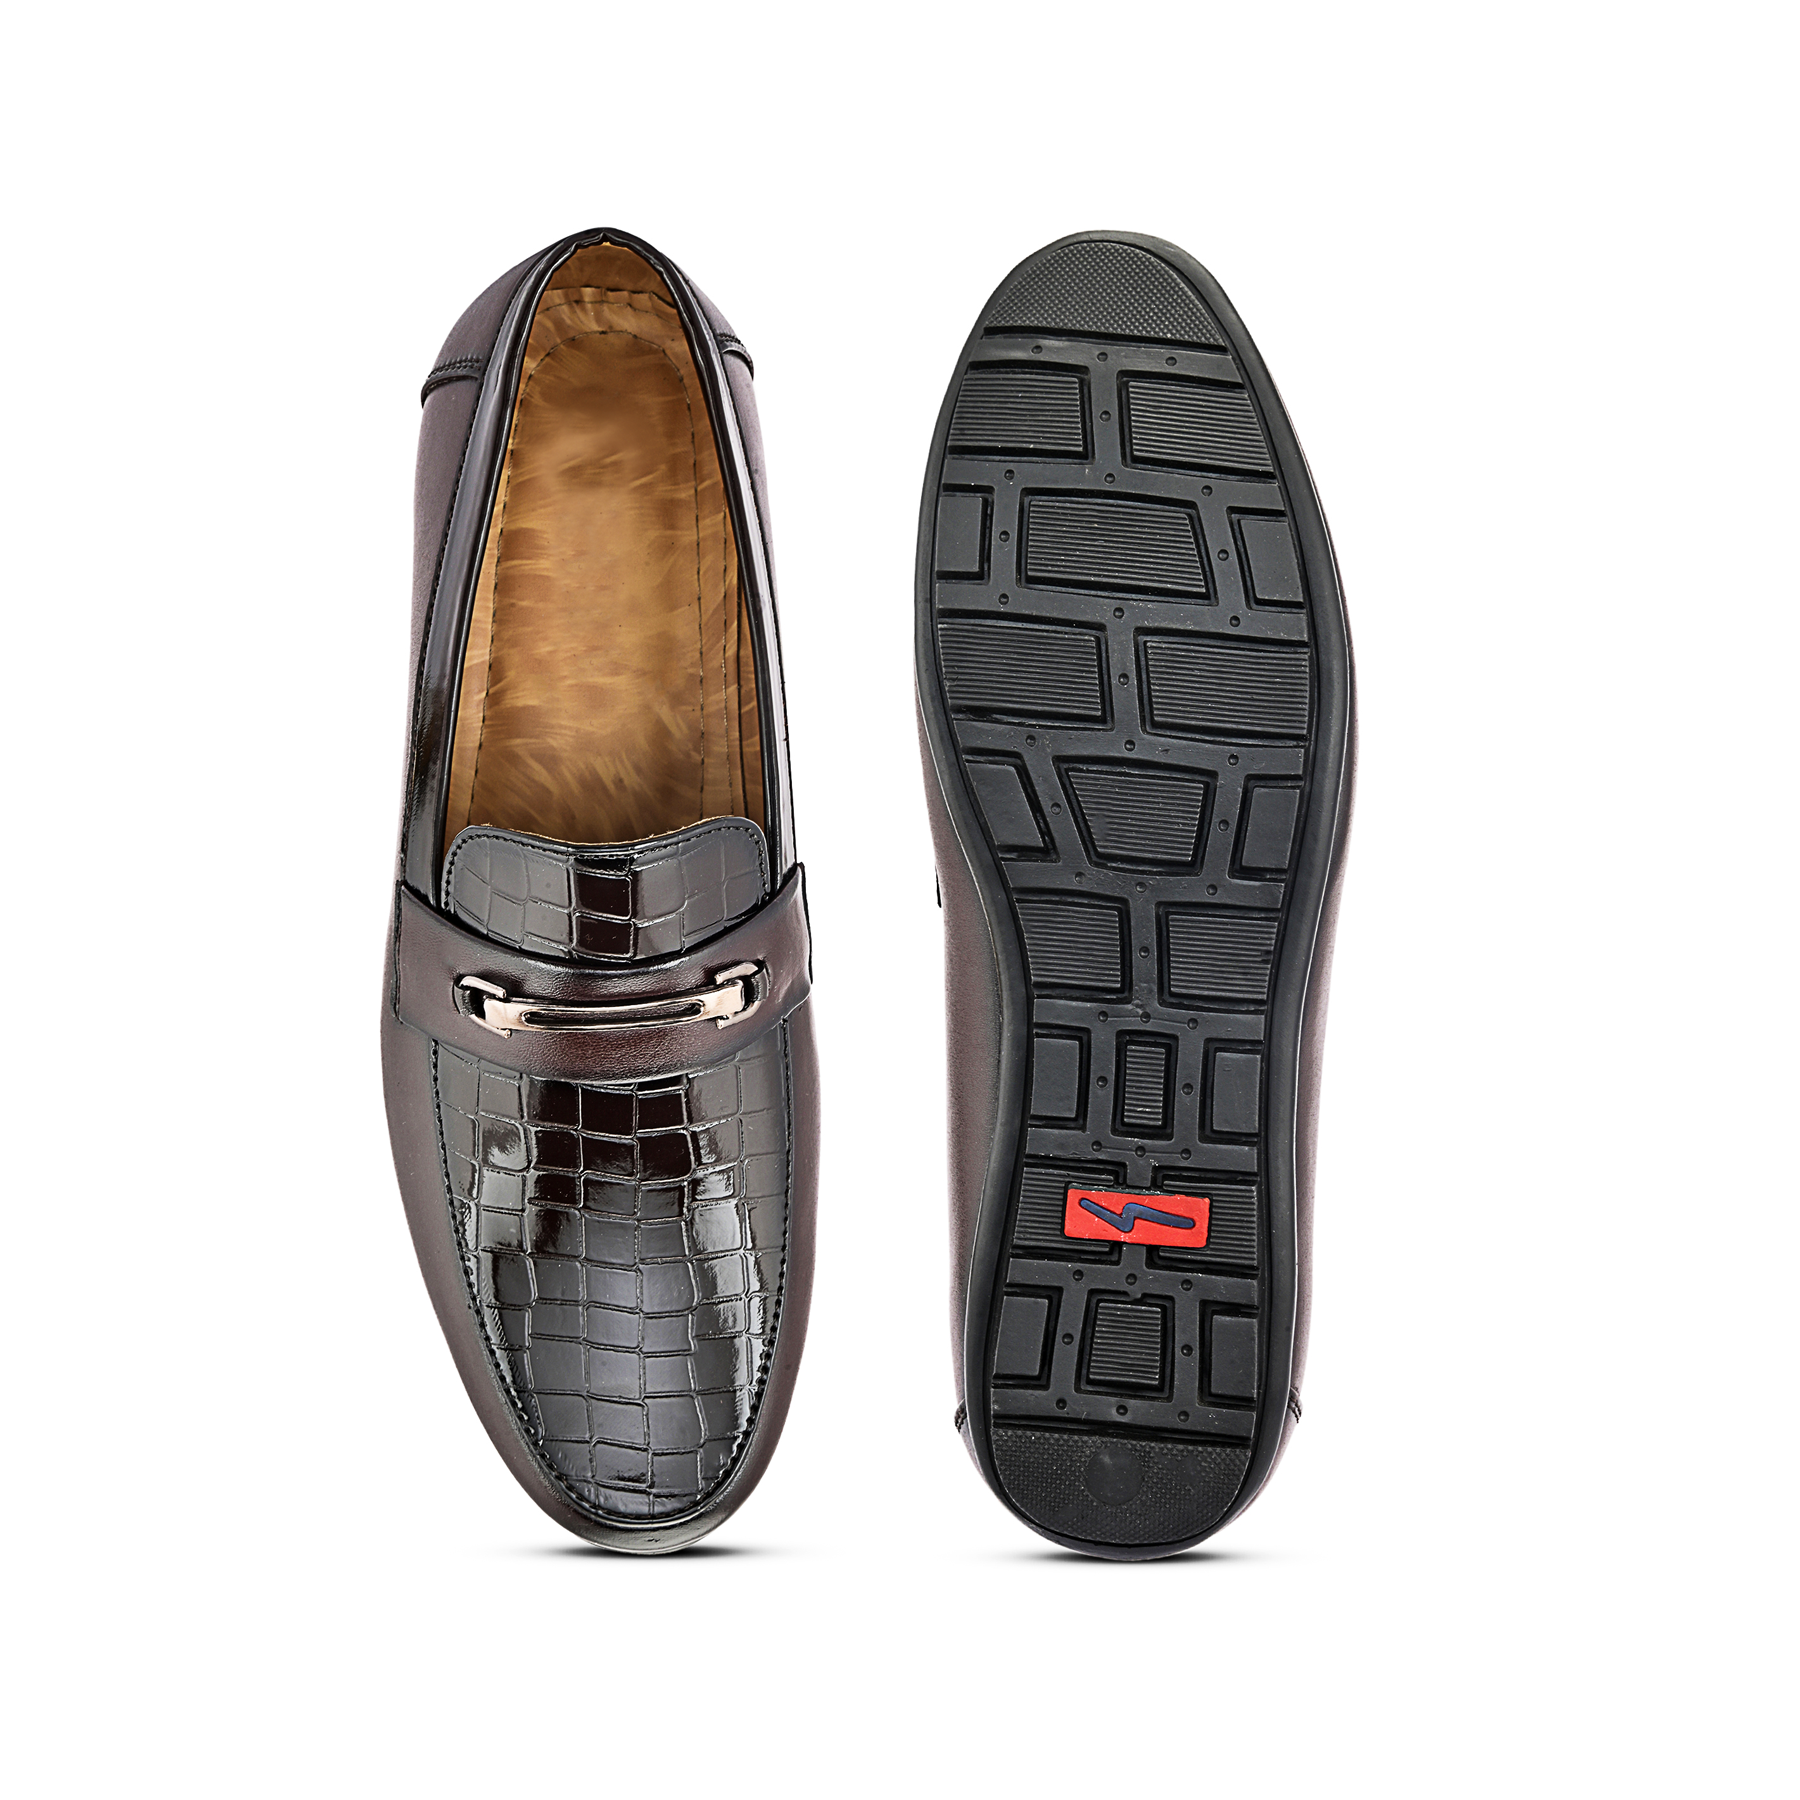 Simba Mocassin Loafer Brown